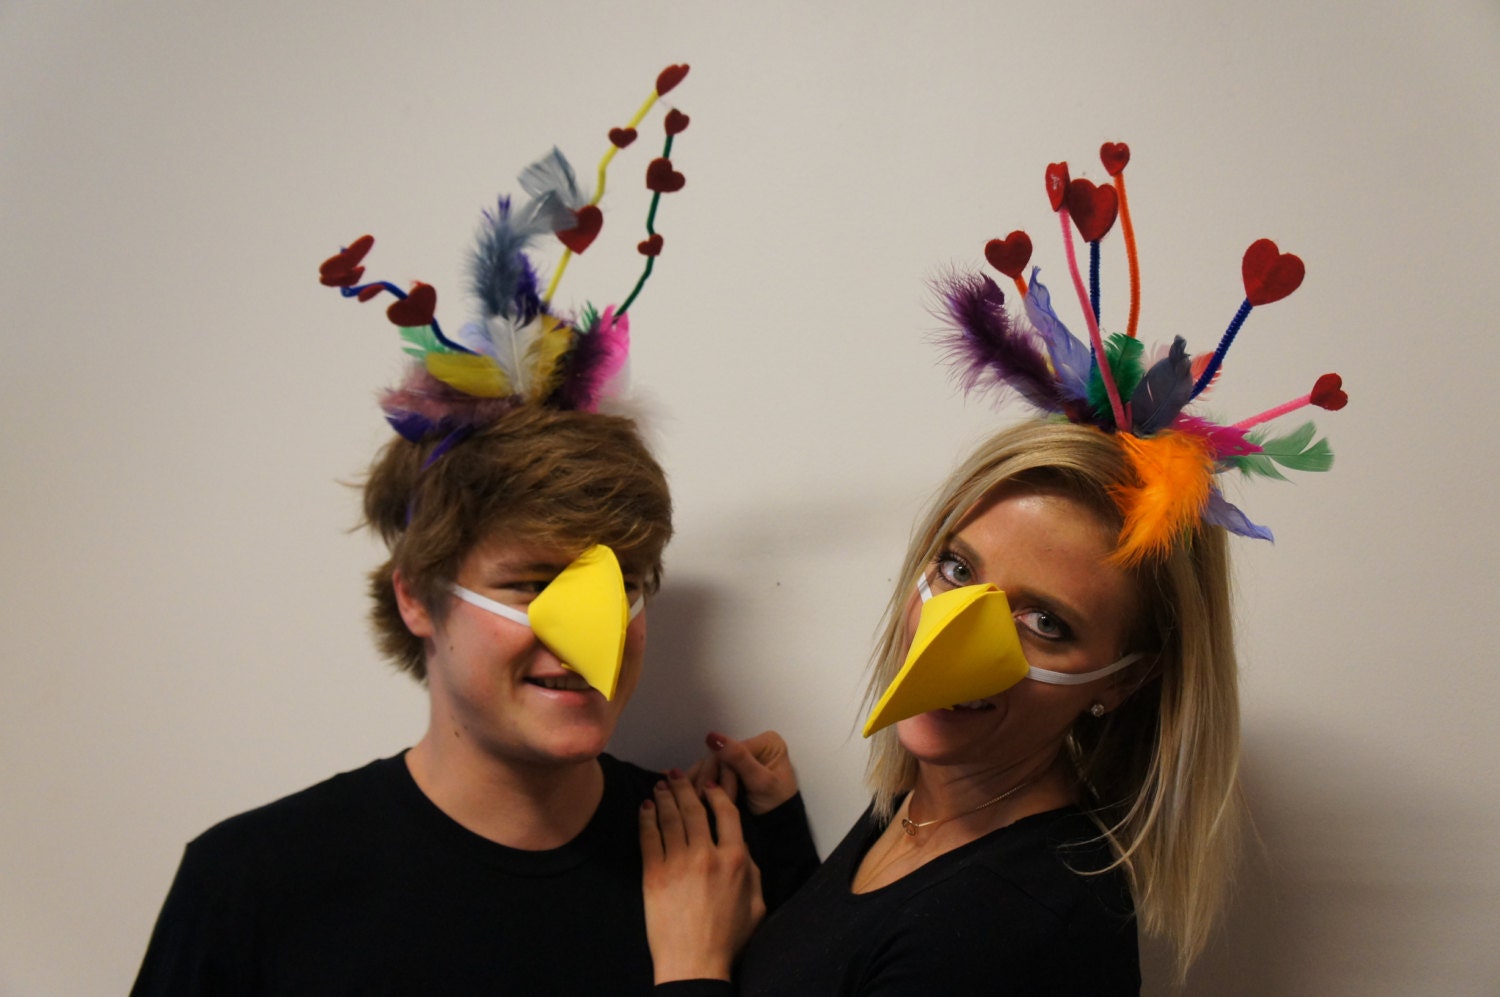 Love Birds Couples Halloween Costume Pun Play on Words Adult - Etsy